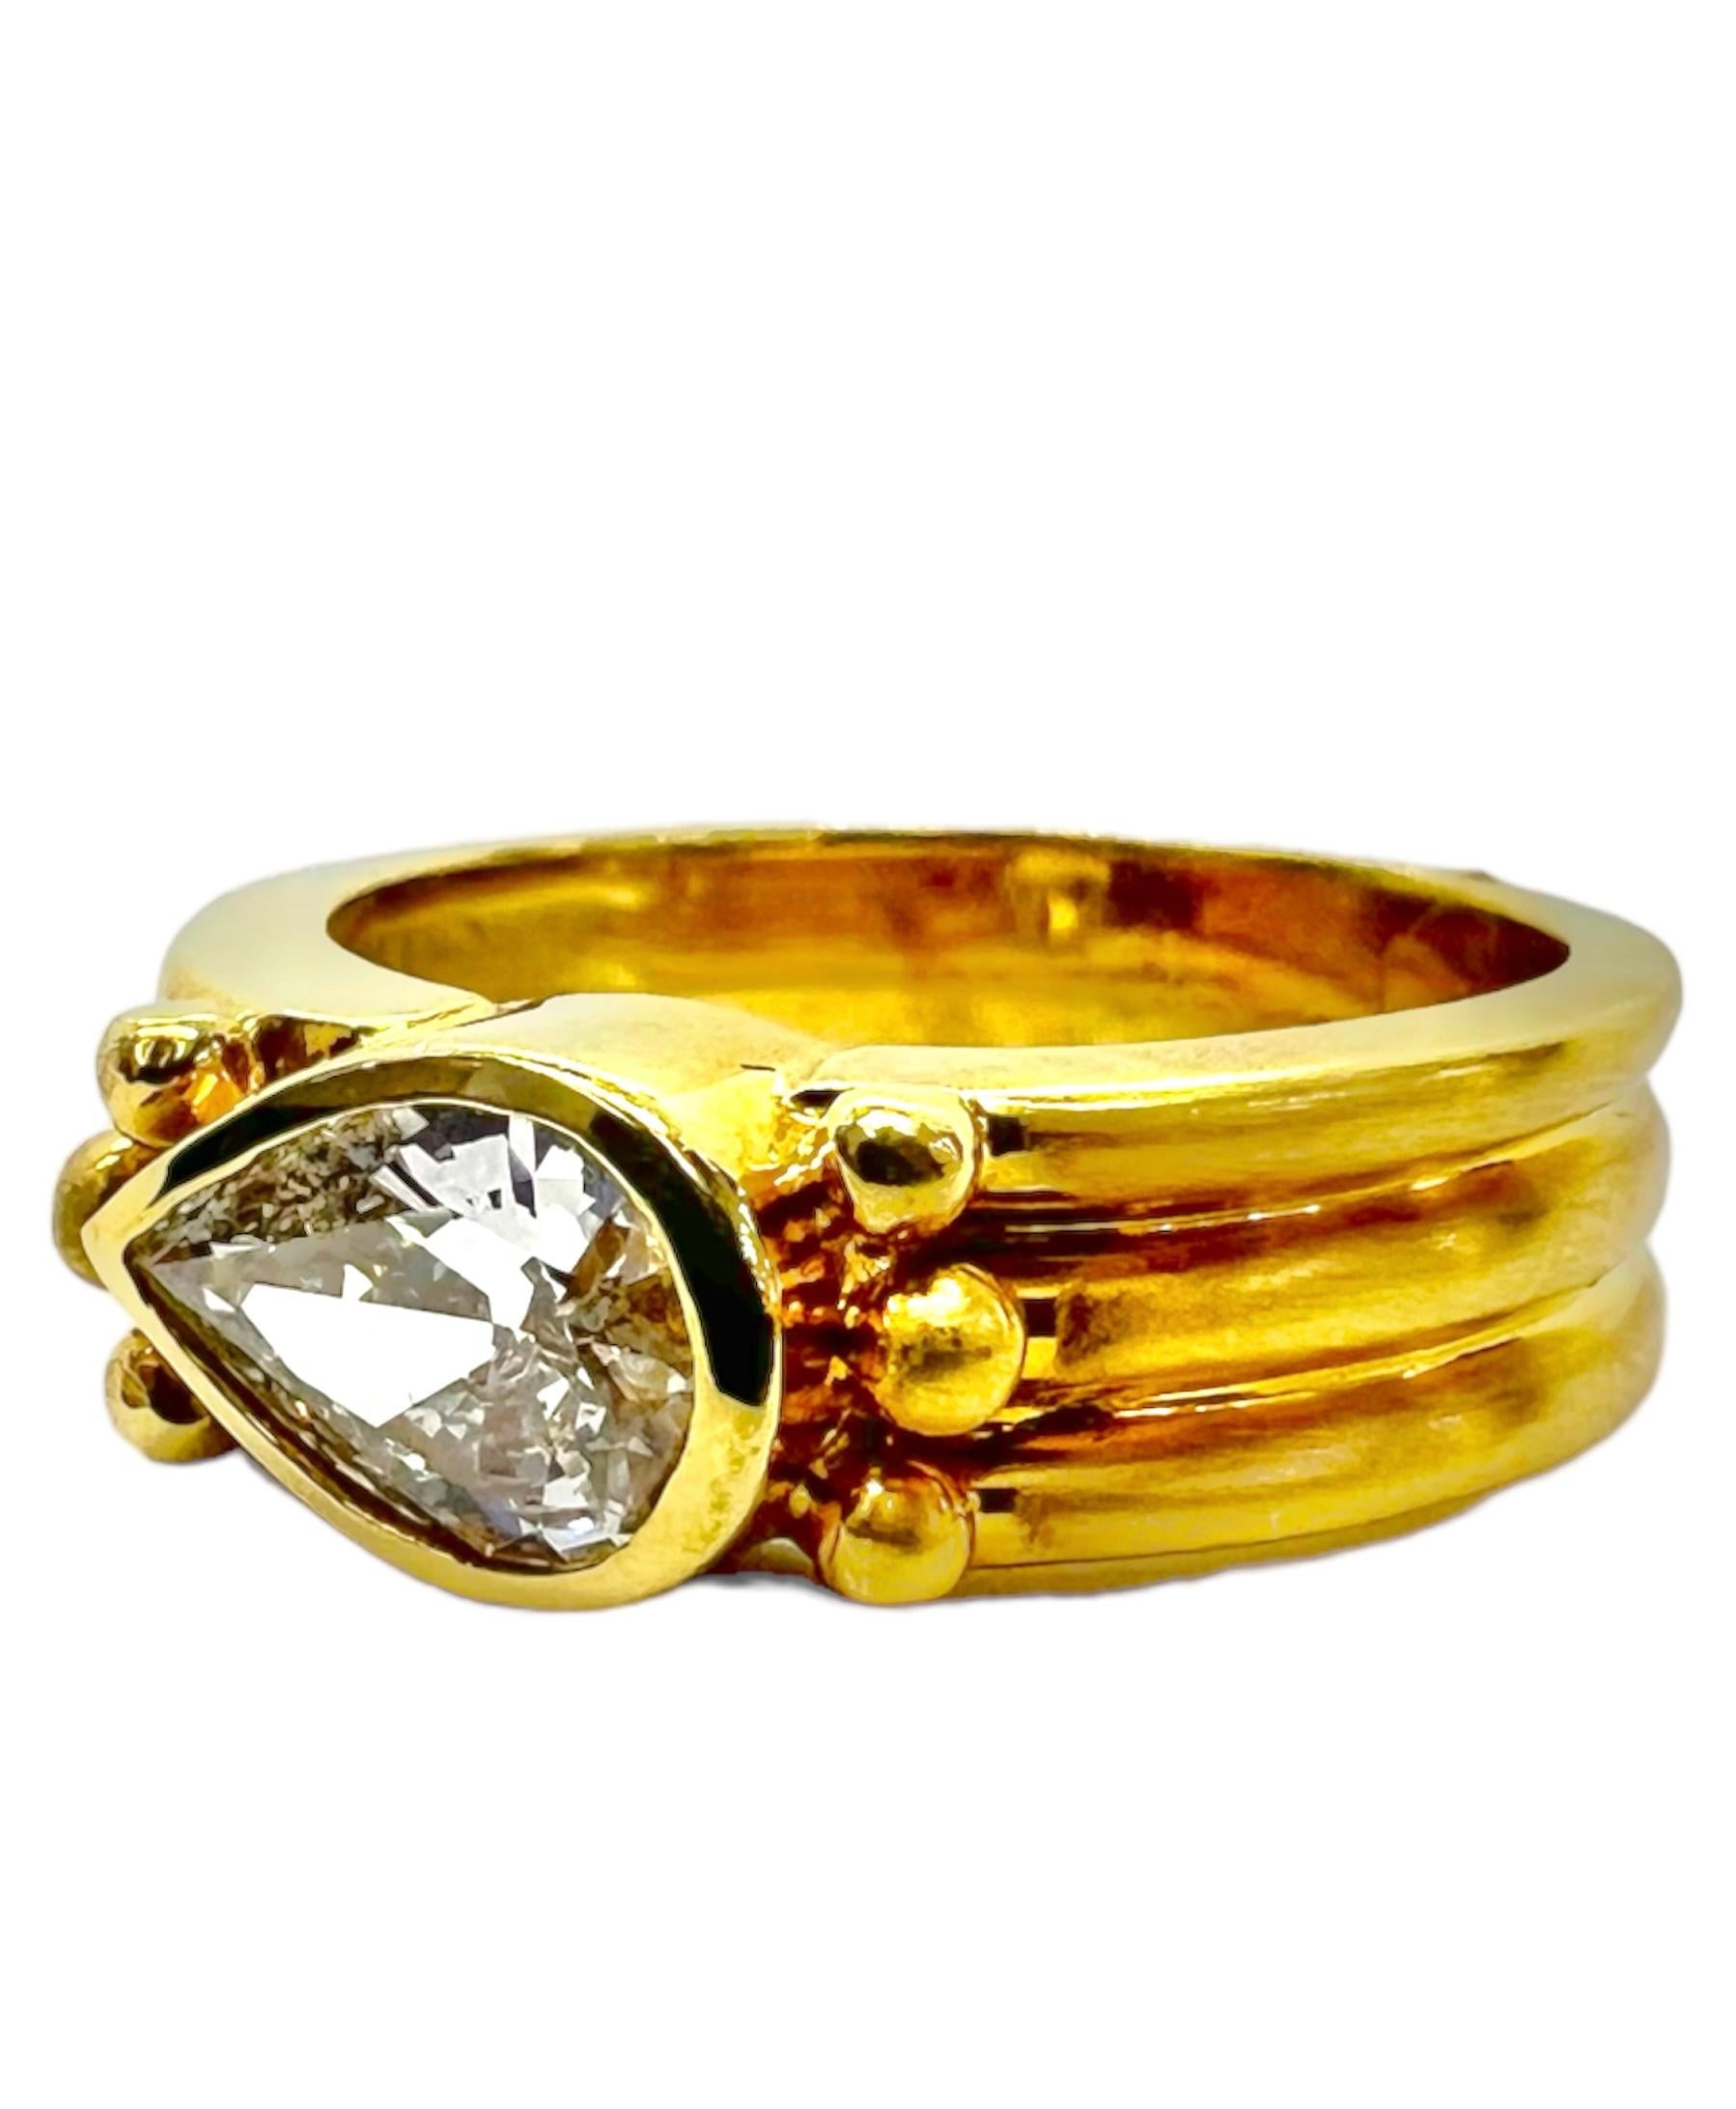 18K yellow gold ring with pear shaped diamond.

Sophia D by Joseph Dardashti LTD has been known worldwide for 35 years and are inspired by classic Art Deco design that merges with modern manufacturing techniques.  